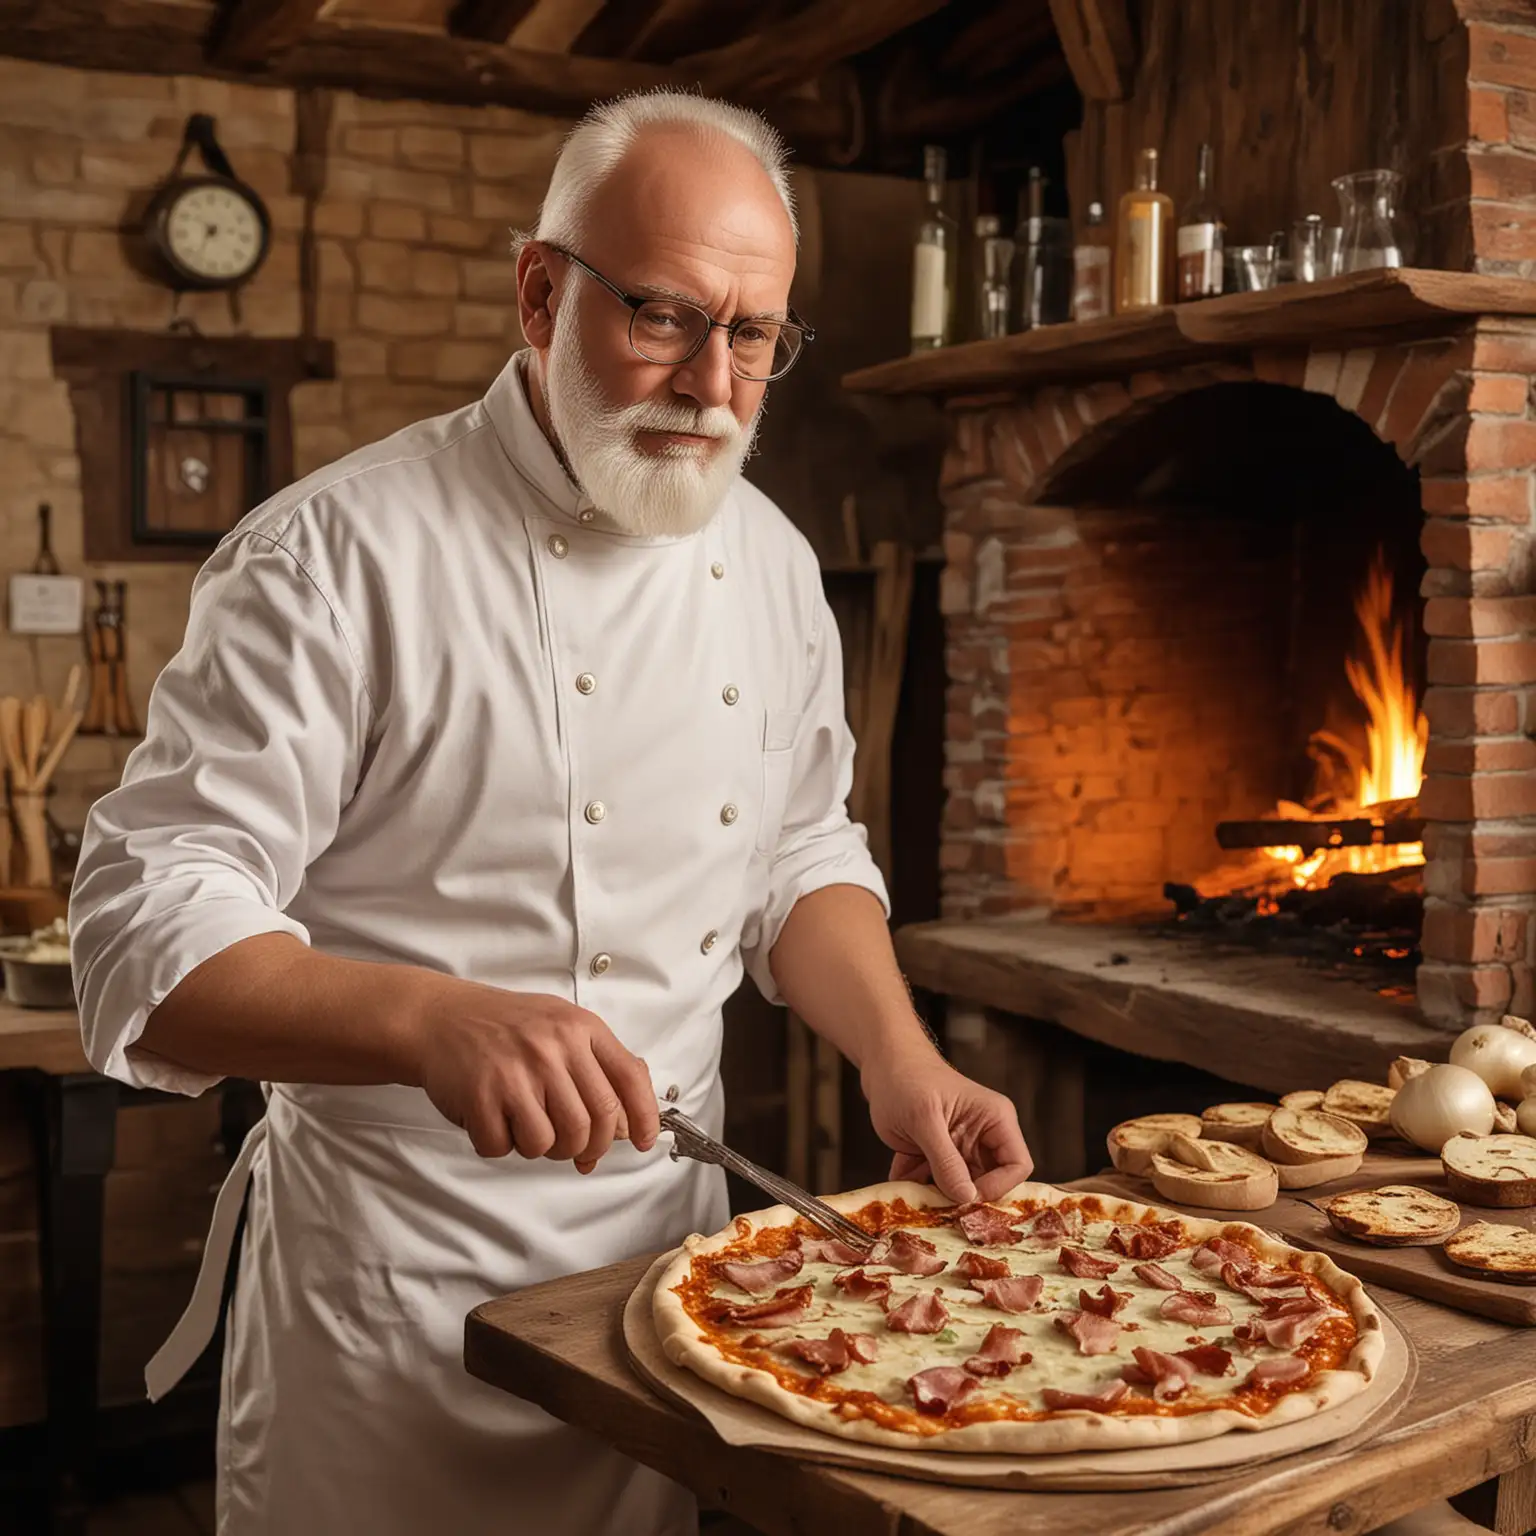 Elderly Cook Preparing Traditional Alsatian Flat Pizza with Wooden House Decor